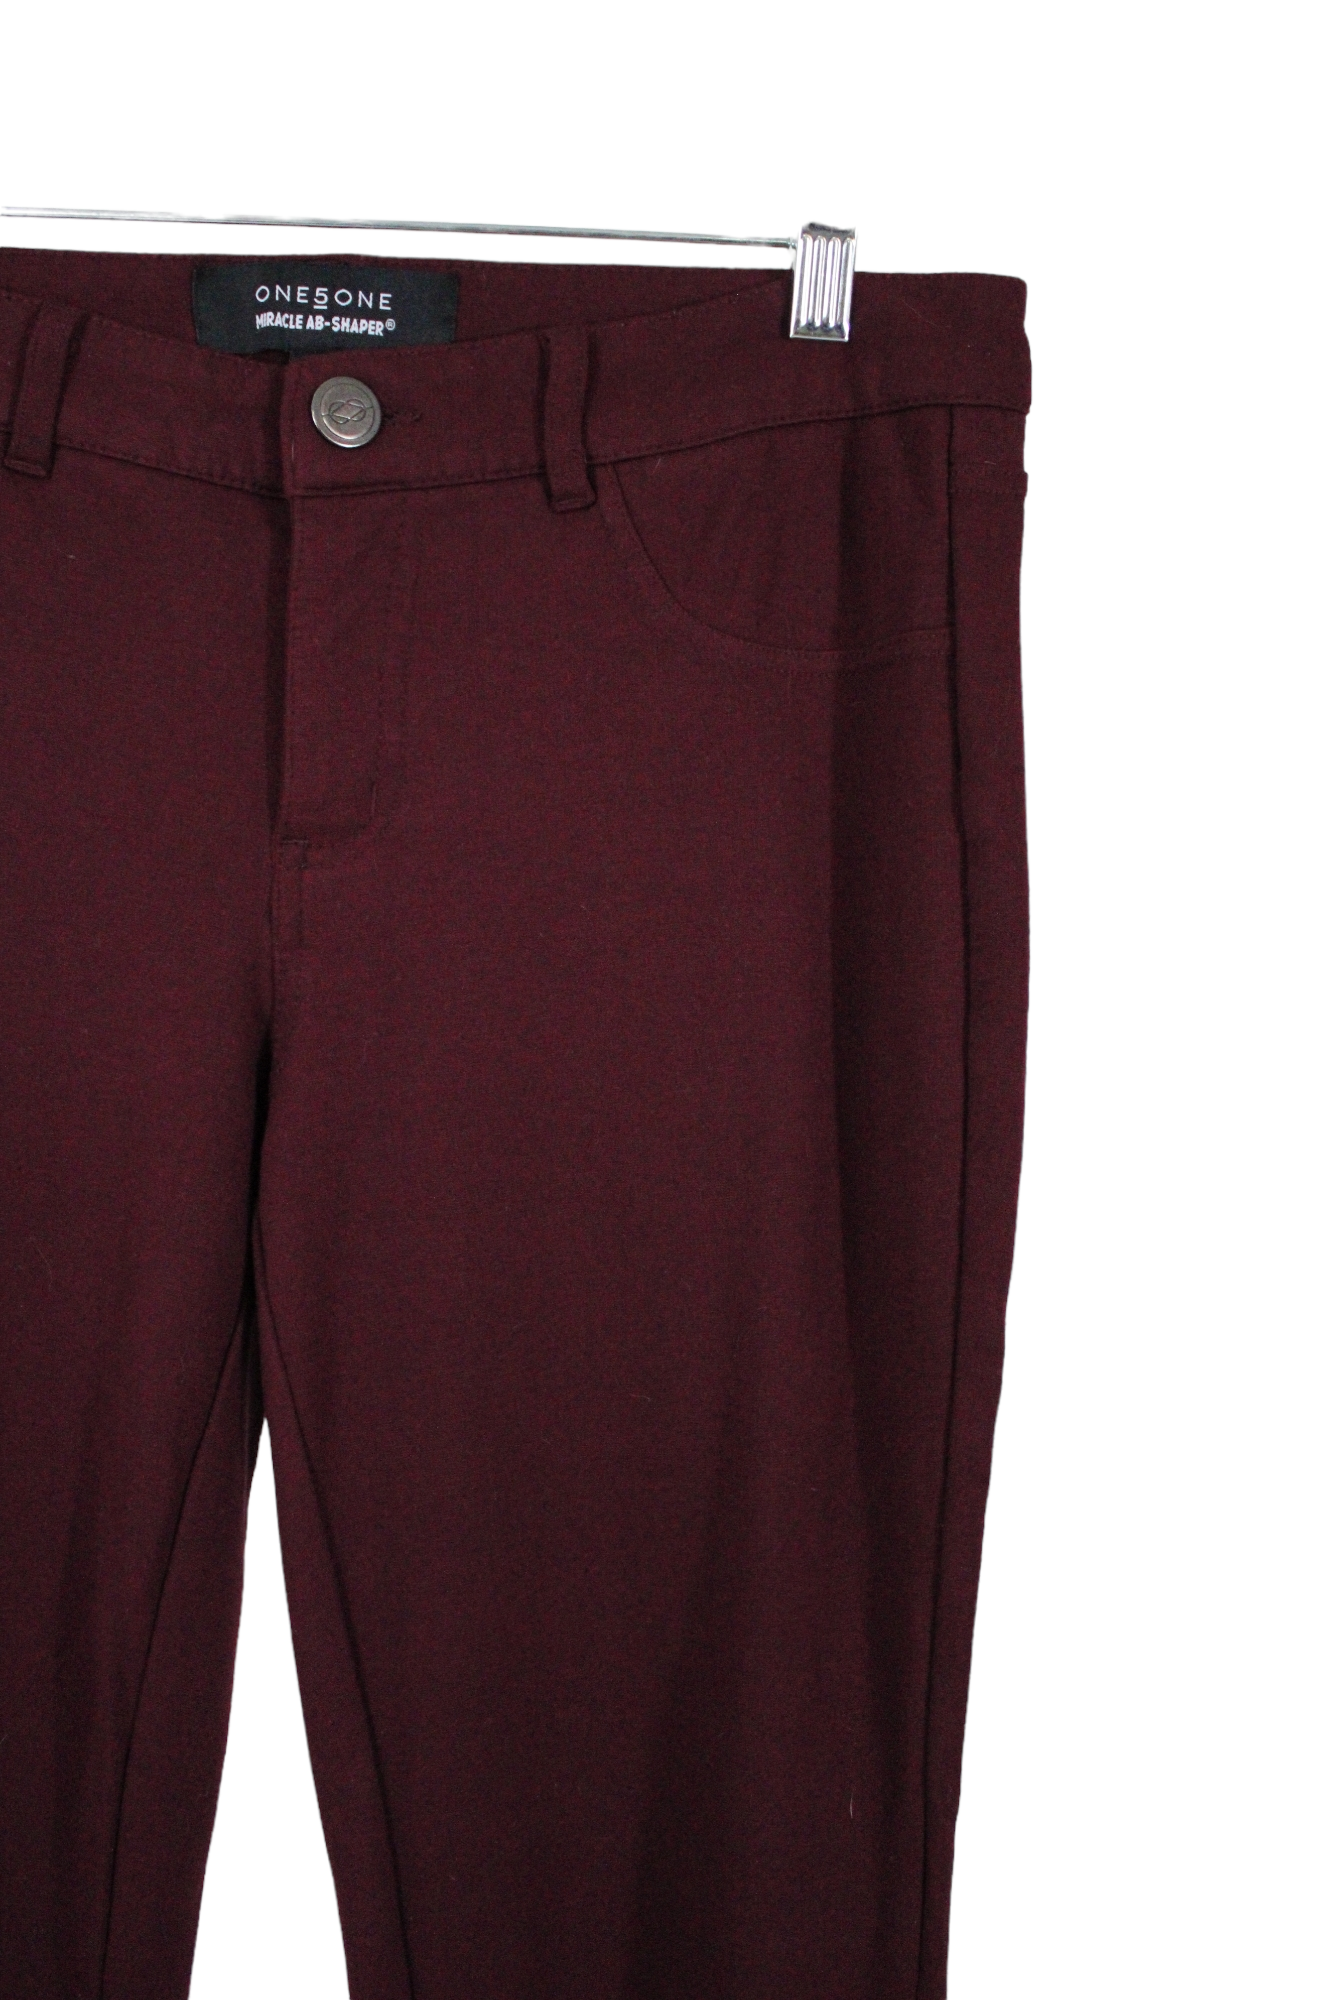 One 5 One Miracle Ab Shaper Maroon Pants